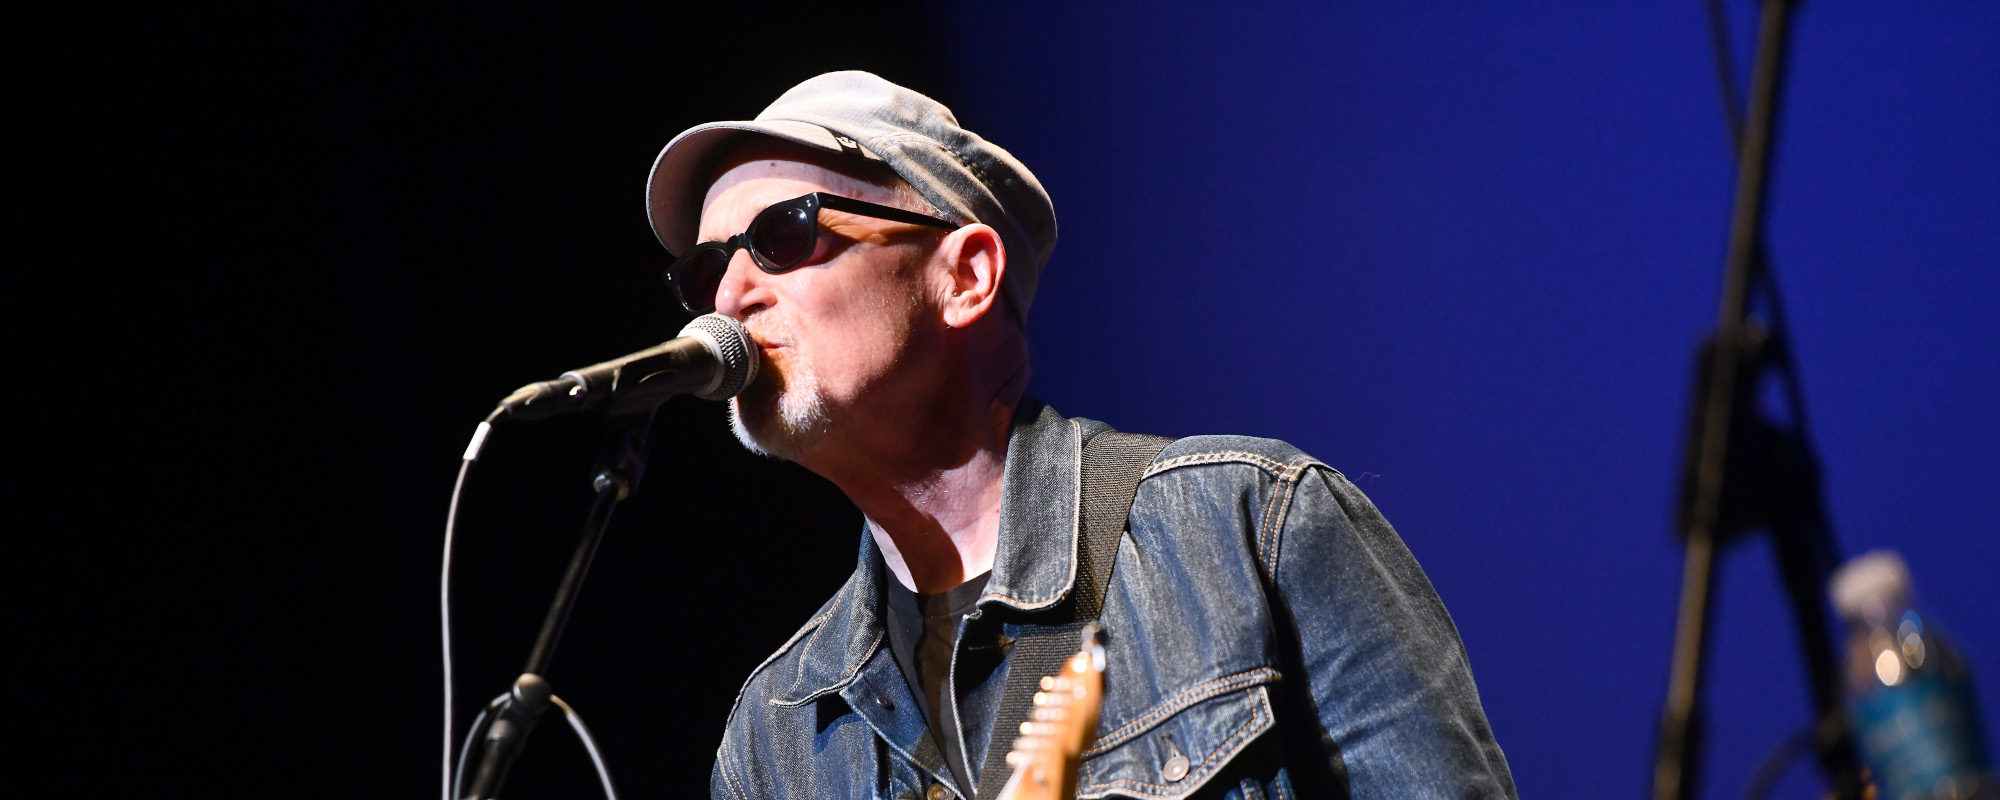 Review: Marshall Crenshaw’s 1983 Release ‘Field Day’ Gets 40th Anniversary Upgrade